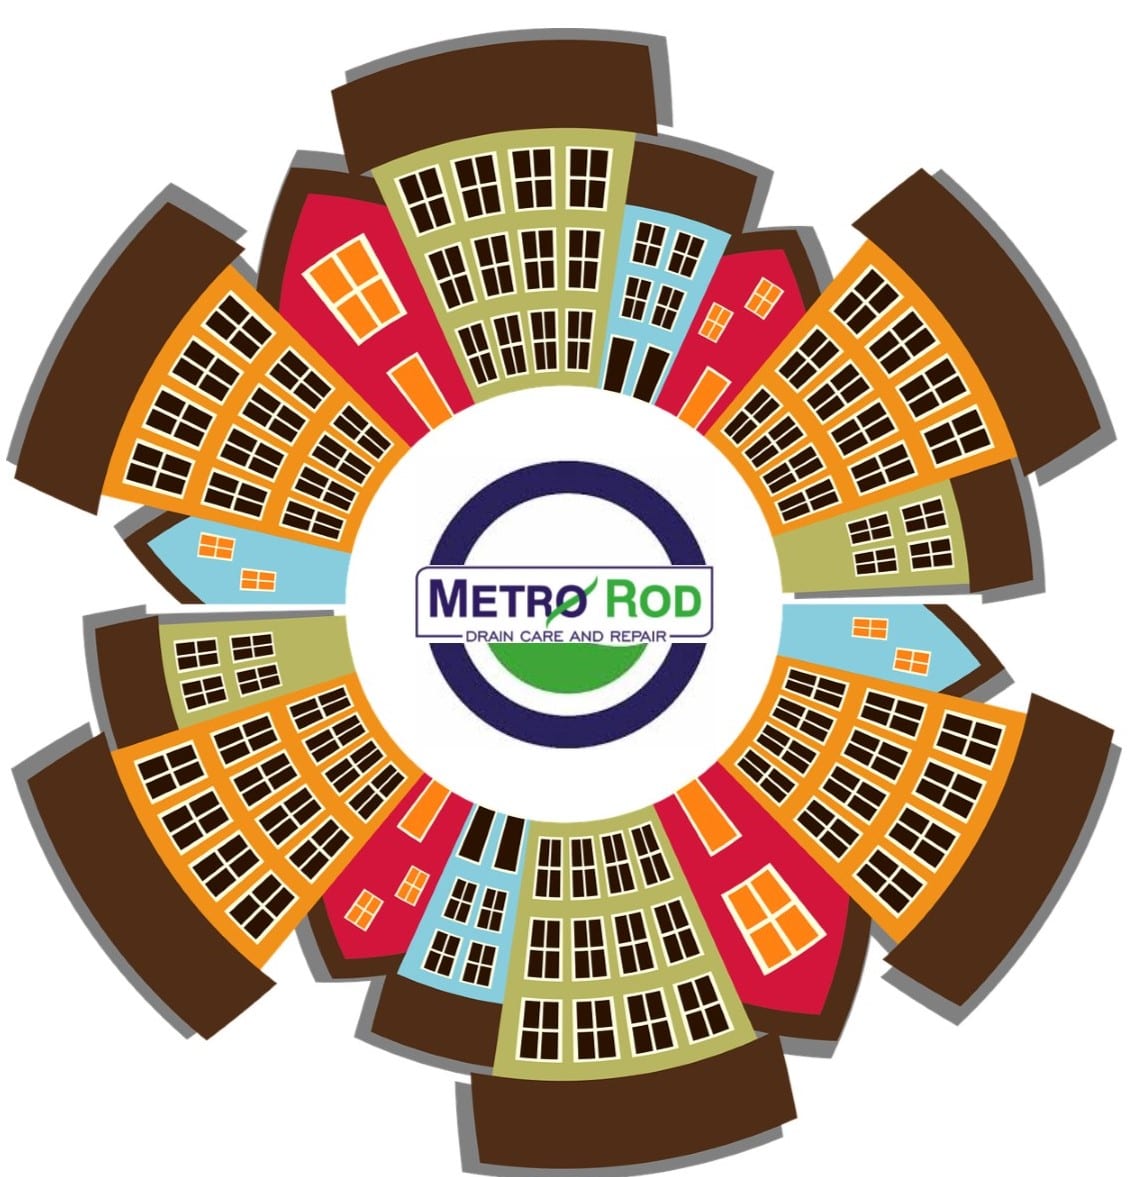 Metro Rod – Caring For The Drains of Tenants in Liverpool, Southport, Ormskirk & Beyond!